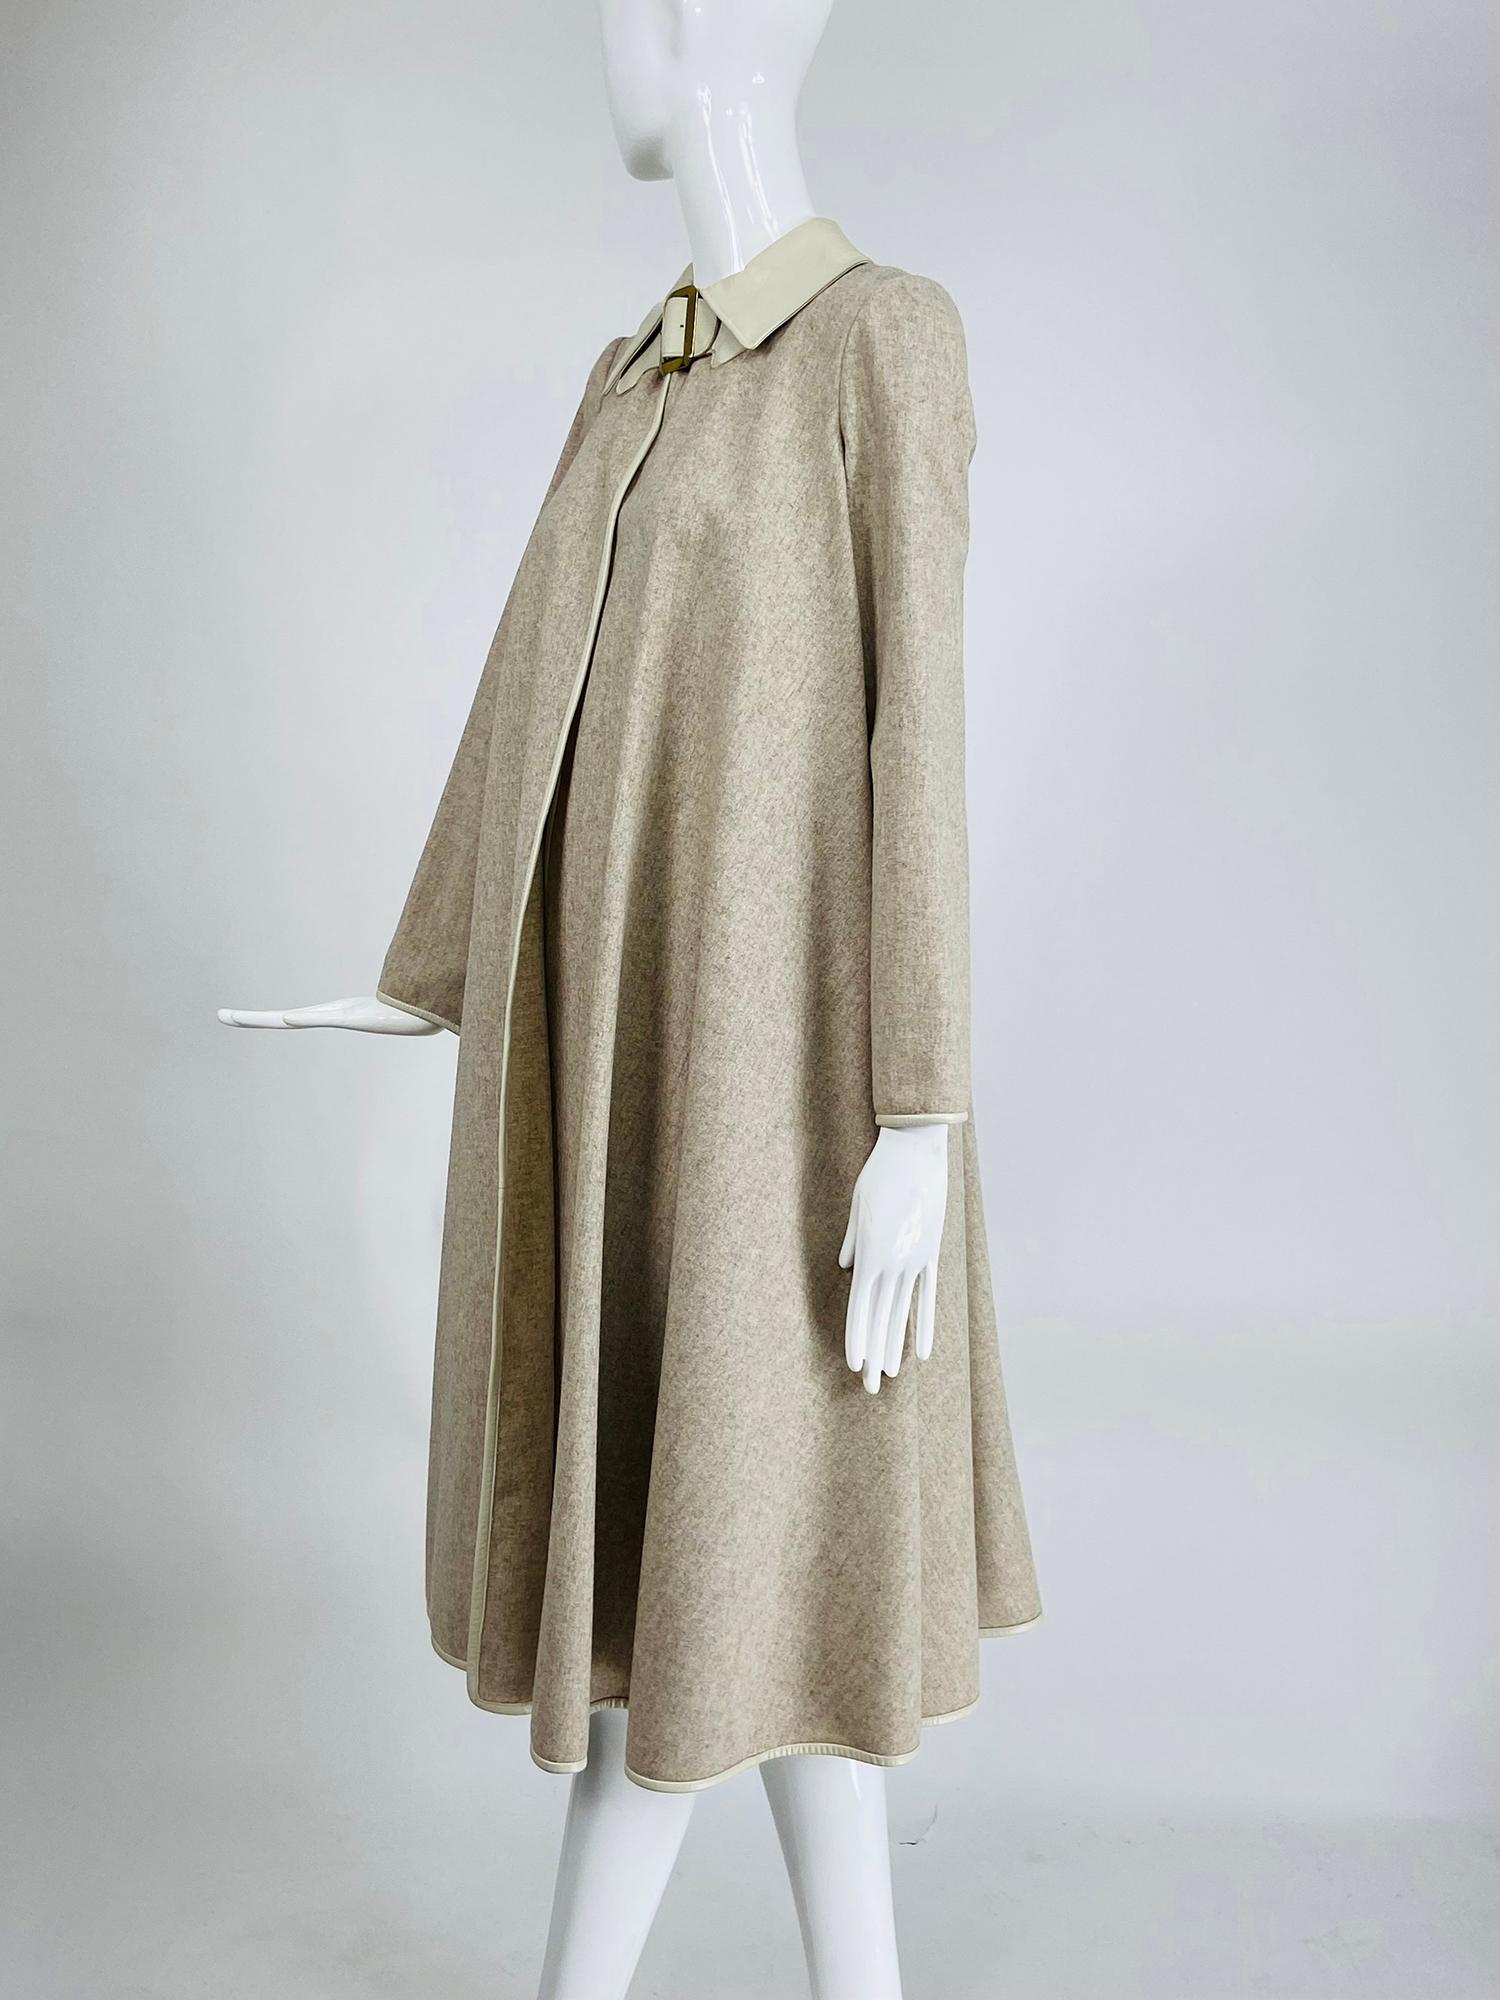 Bonnie Cashin Oatmeal Double Faced Wool Bias Circle Leather Trimmed Coat 1970s For Sale 1